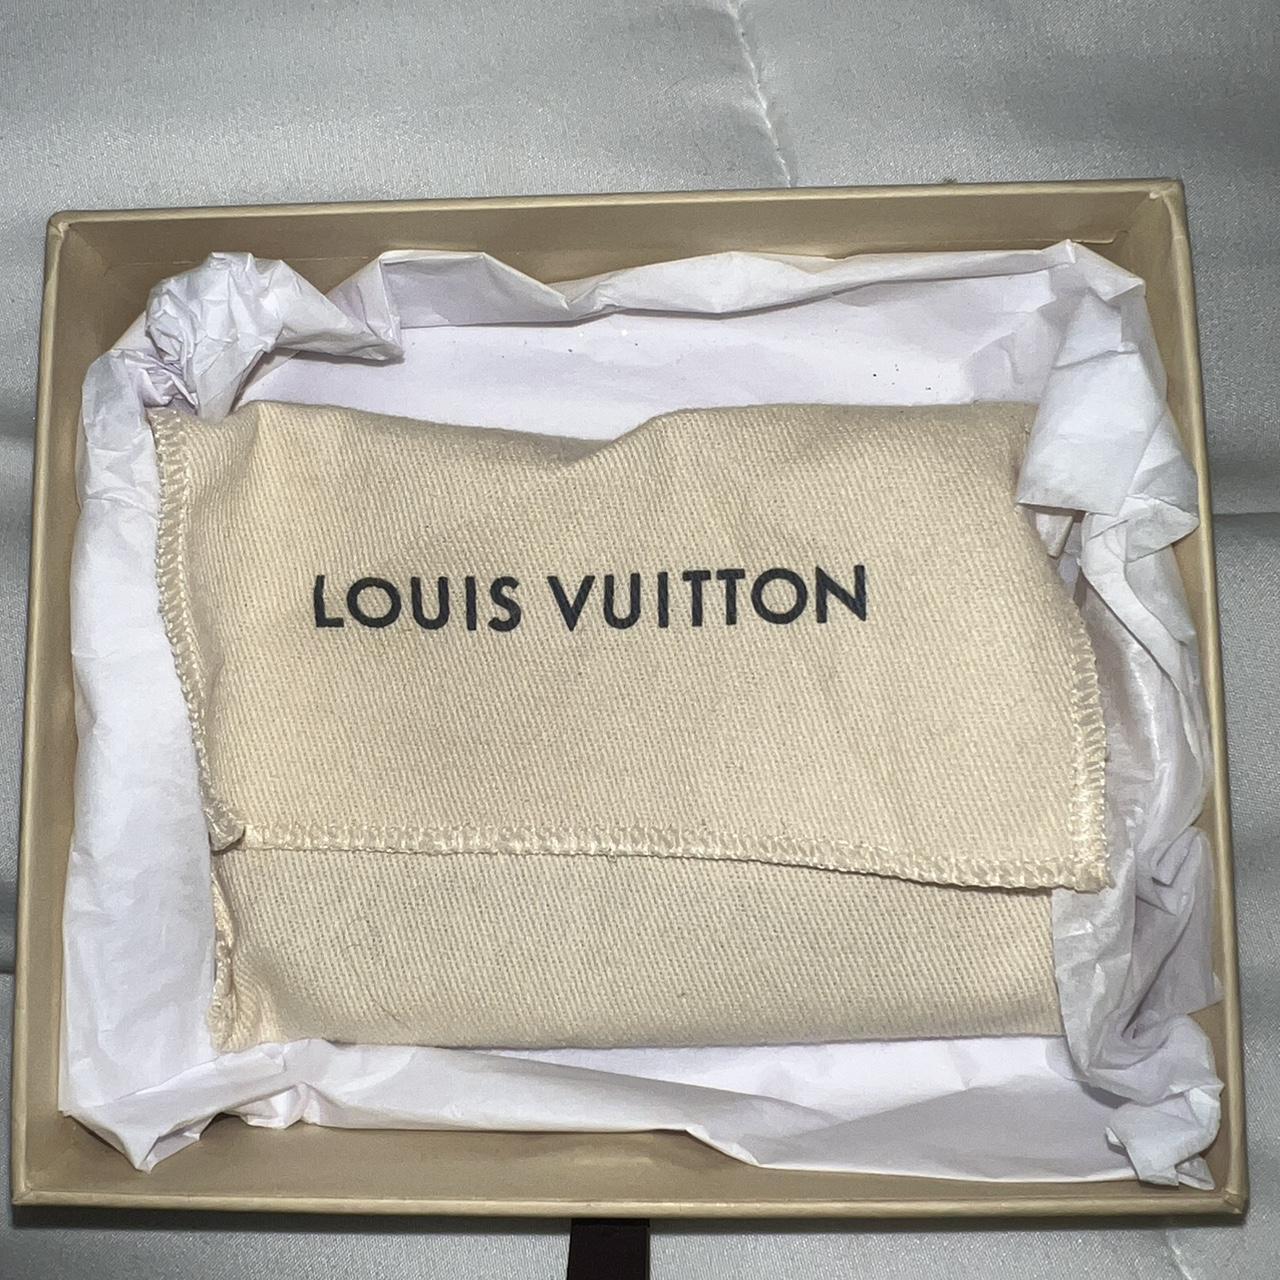 Buy Cheap Louis Vuitton Wallets Key Pouch Black/Brown #99925942 from